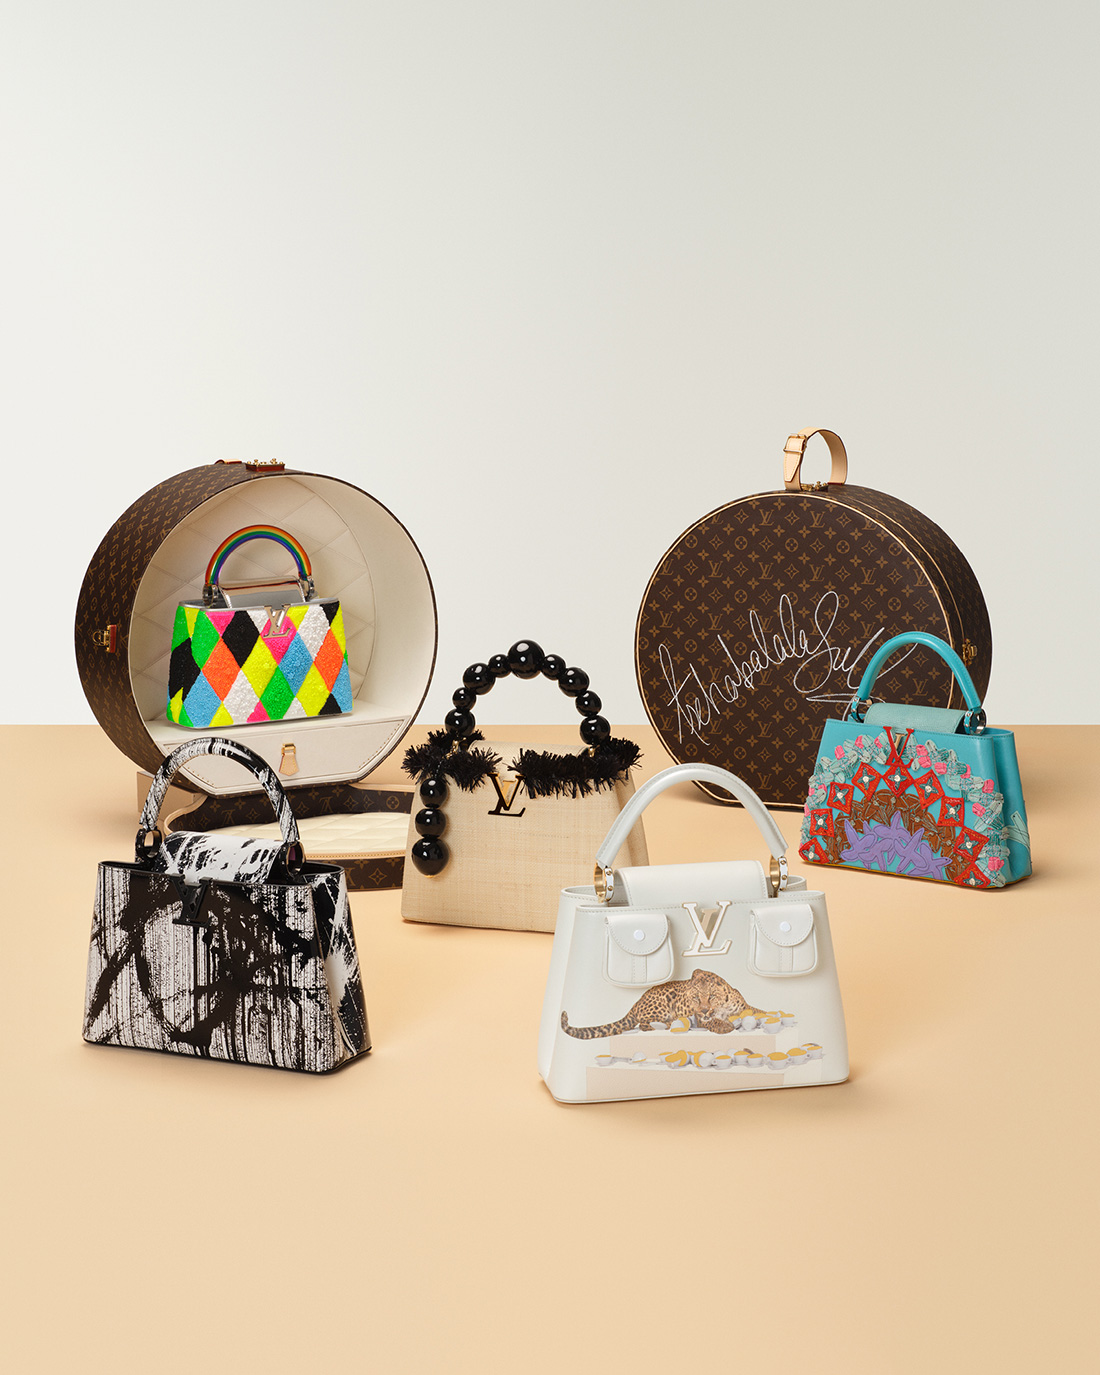 Louis Vuitton Has Indulgent Craft Supplies For Art Lovers - BAGAHOLICBOY